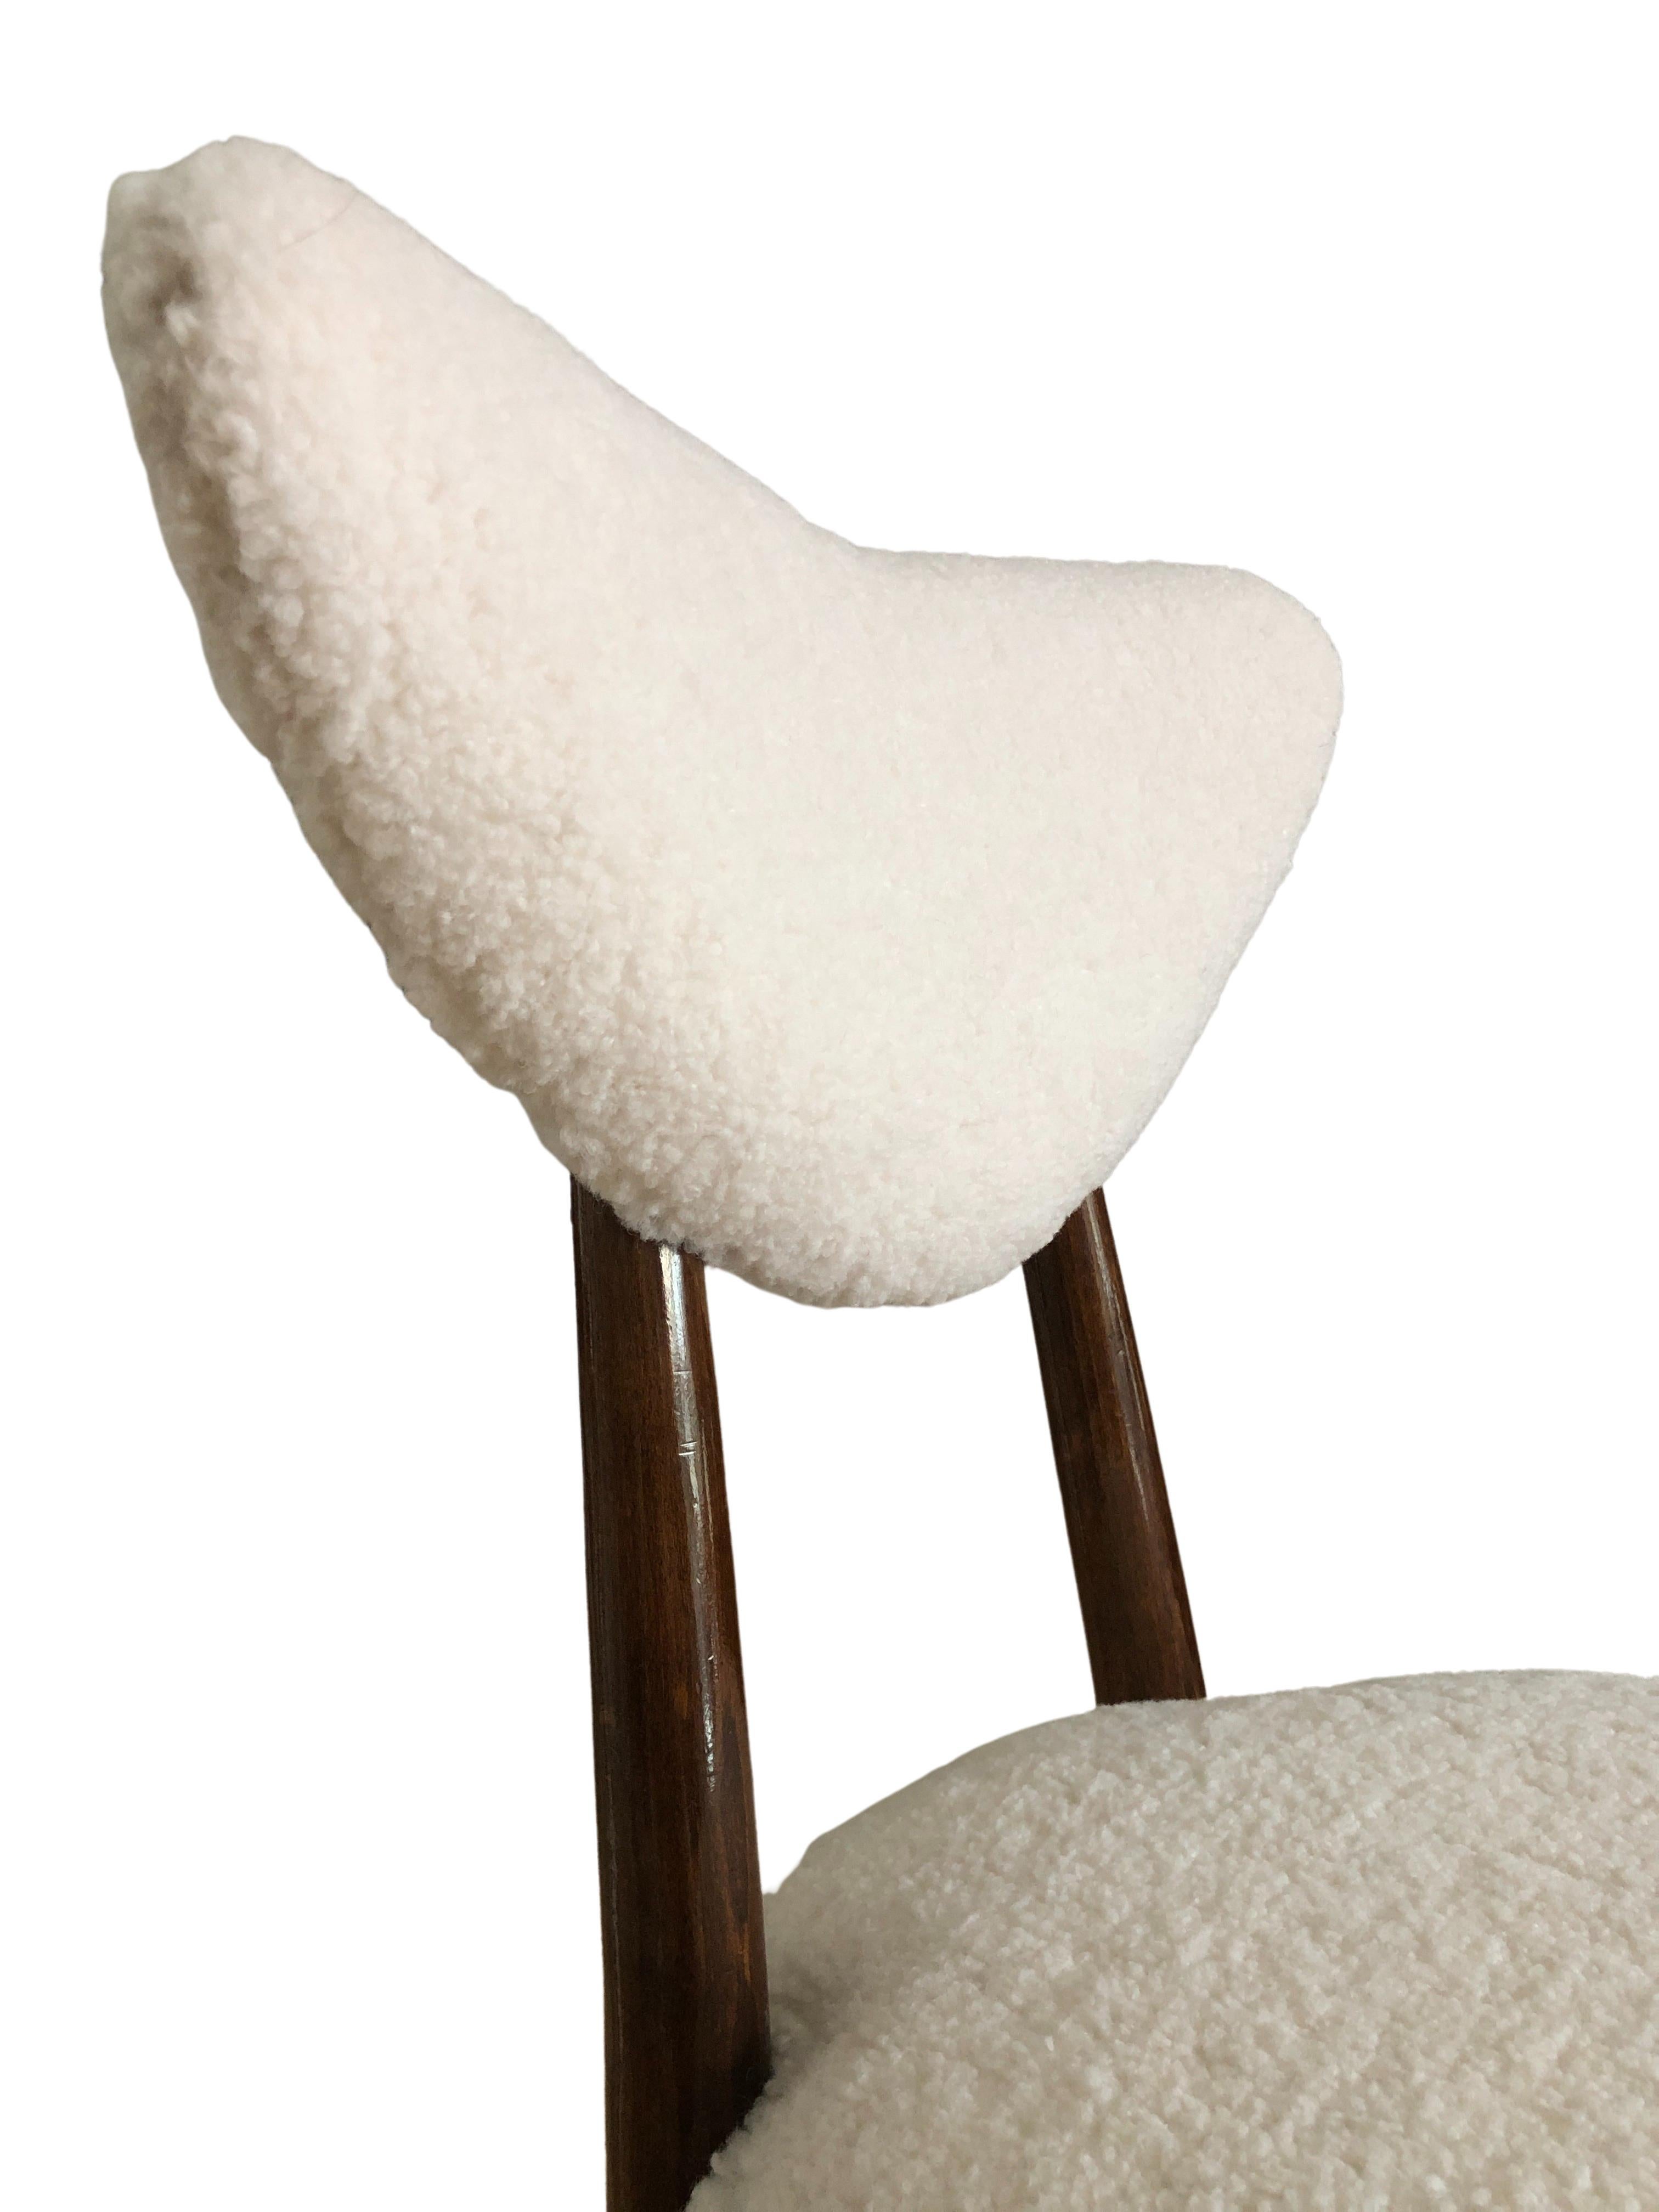 Polish Set of Two Midcentury White Bouclé Heart Chairs, by Kurmanowicz, 1960s For Sale